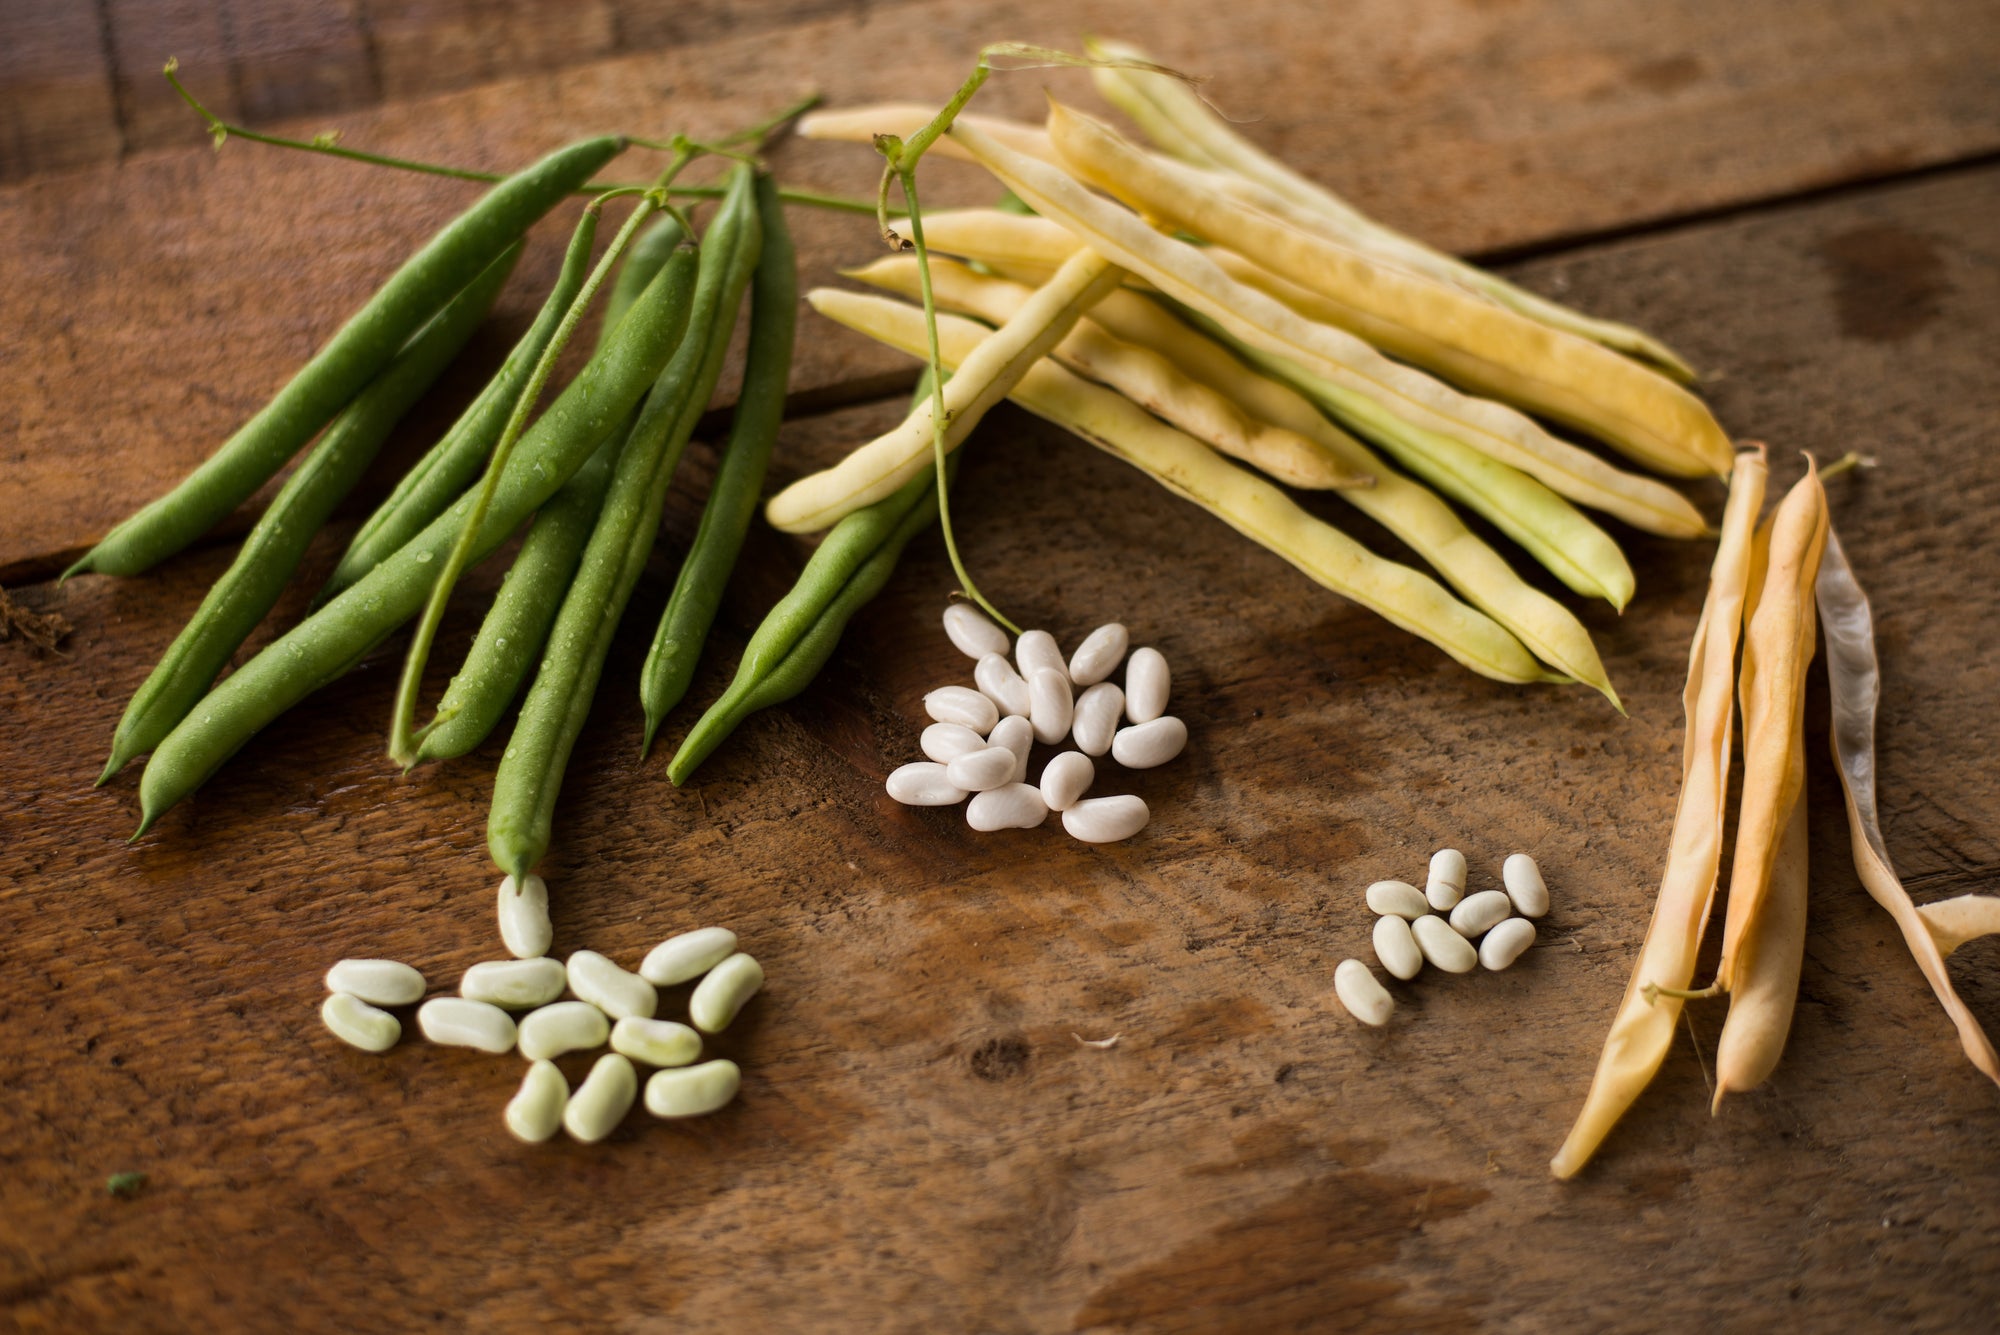 We've bean thinking a lot about these legumes..